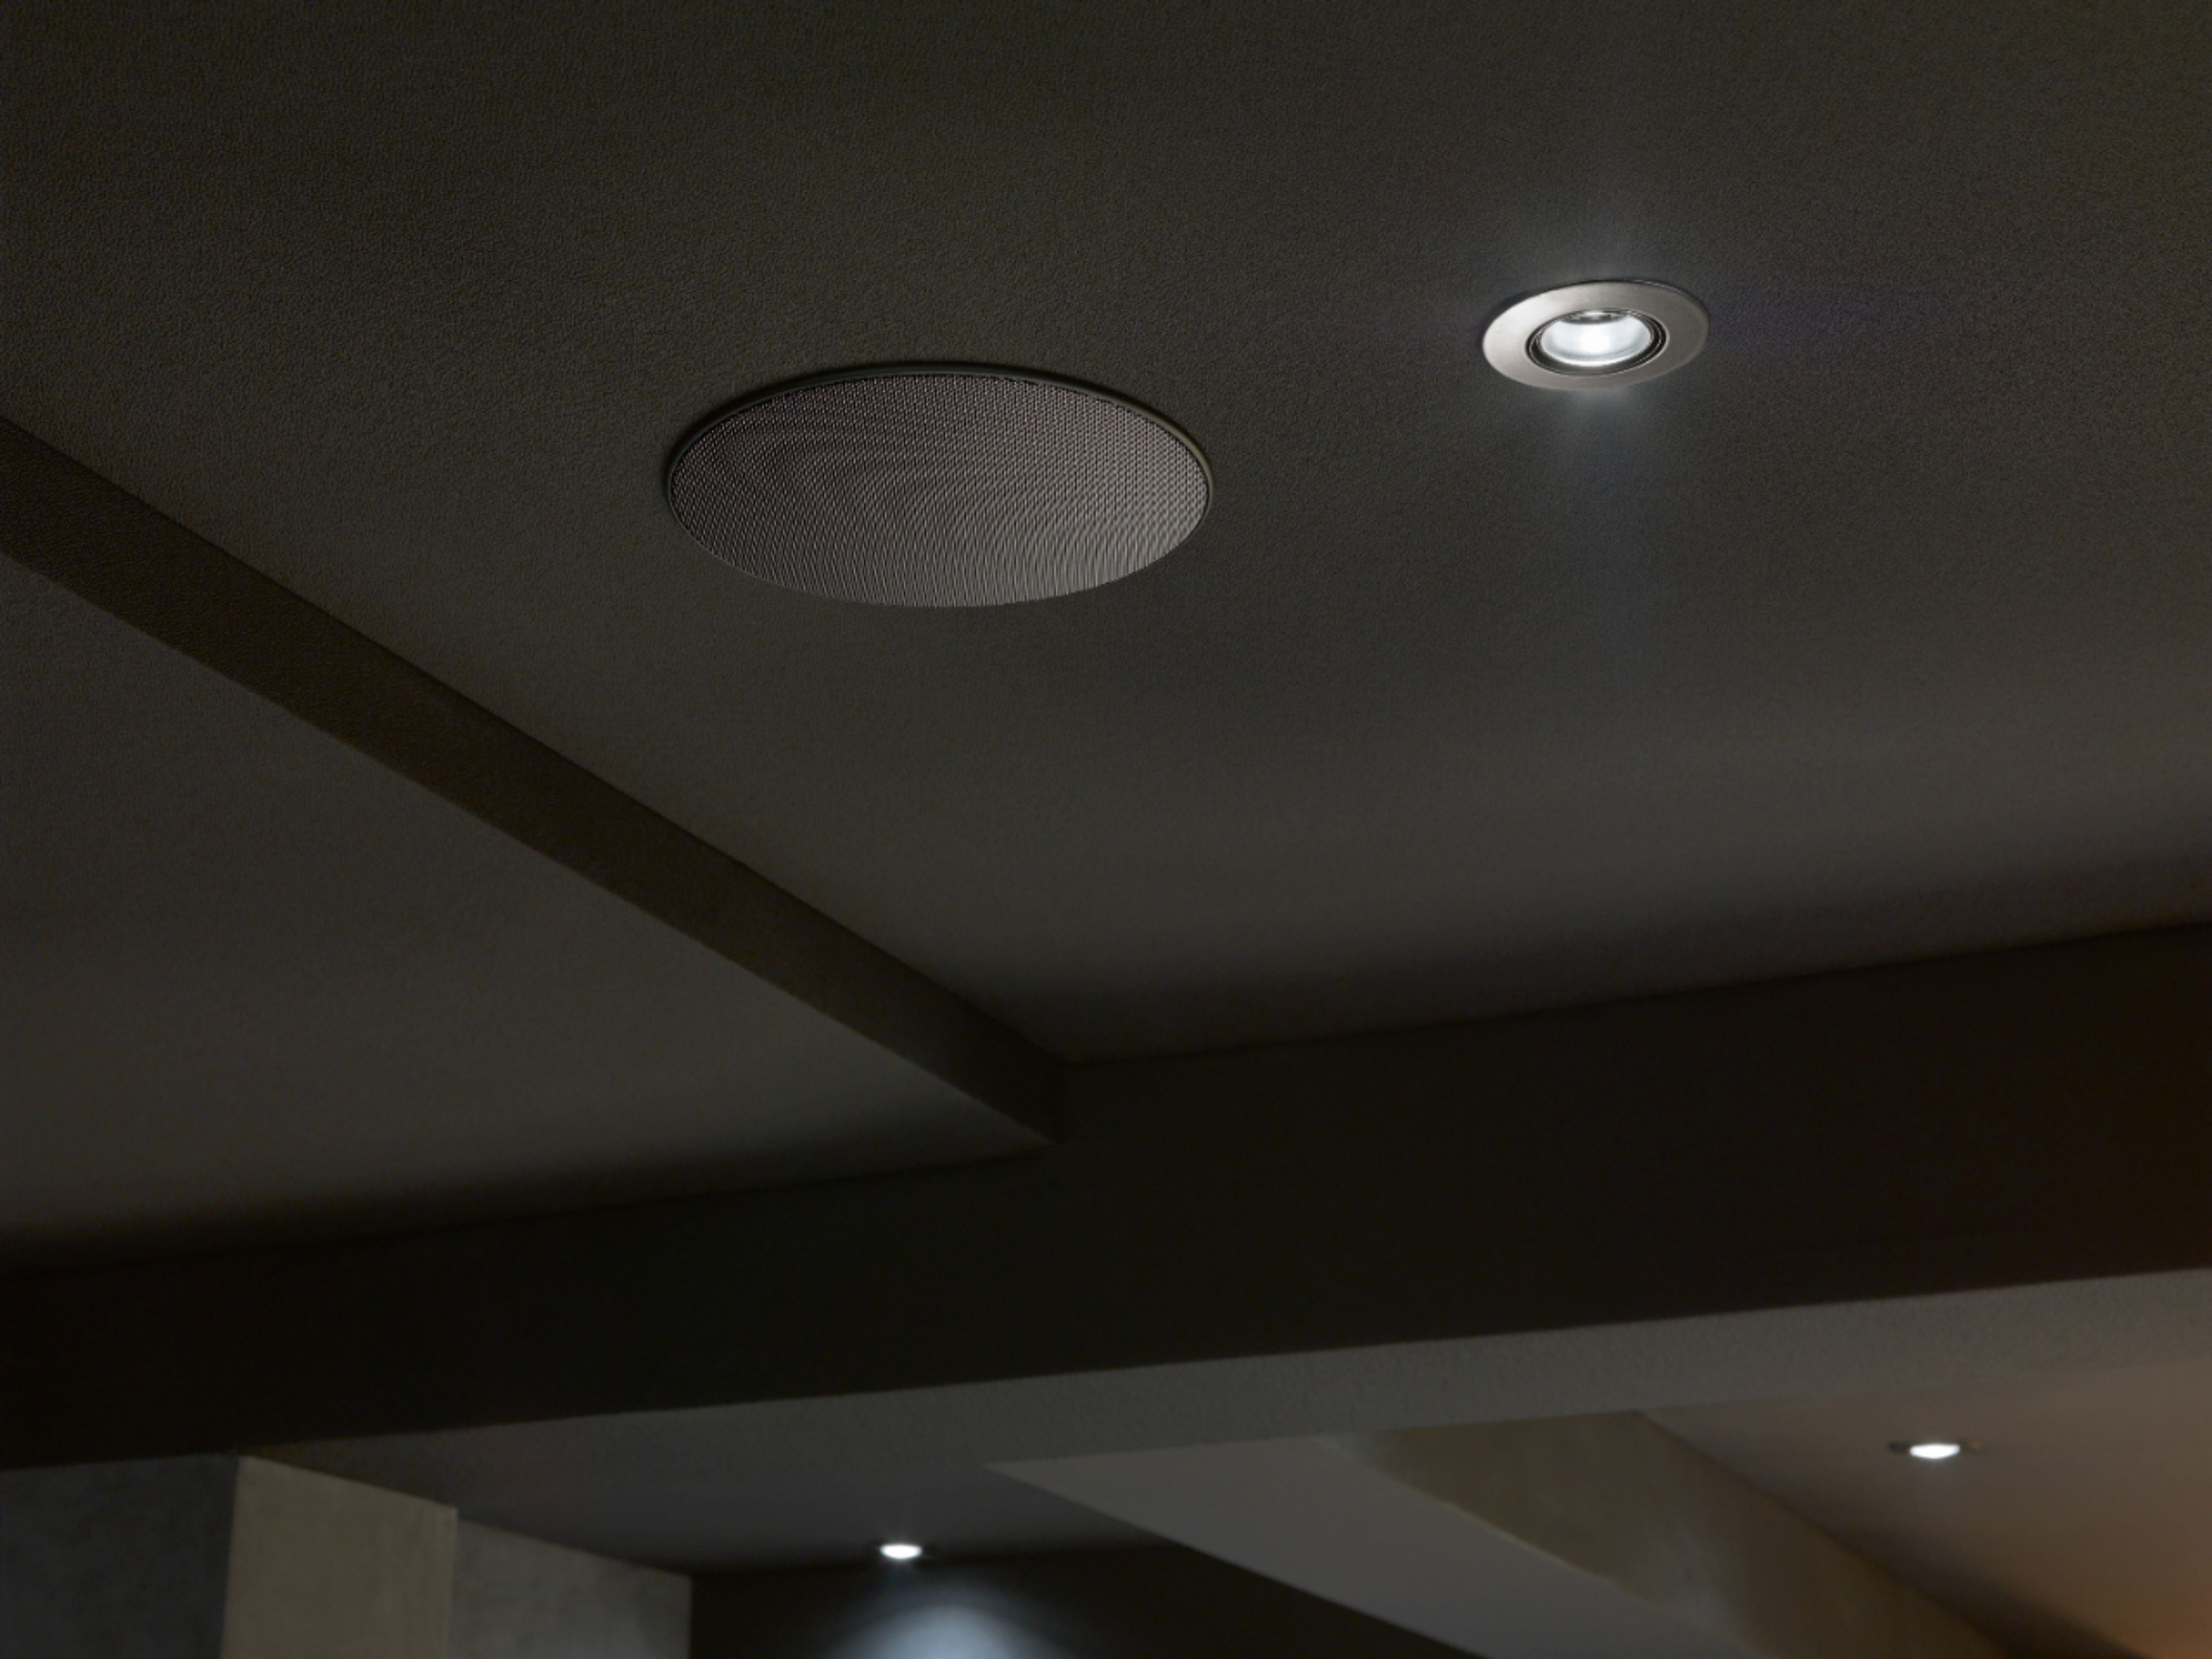 b and w ceiling speakers